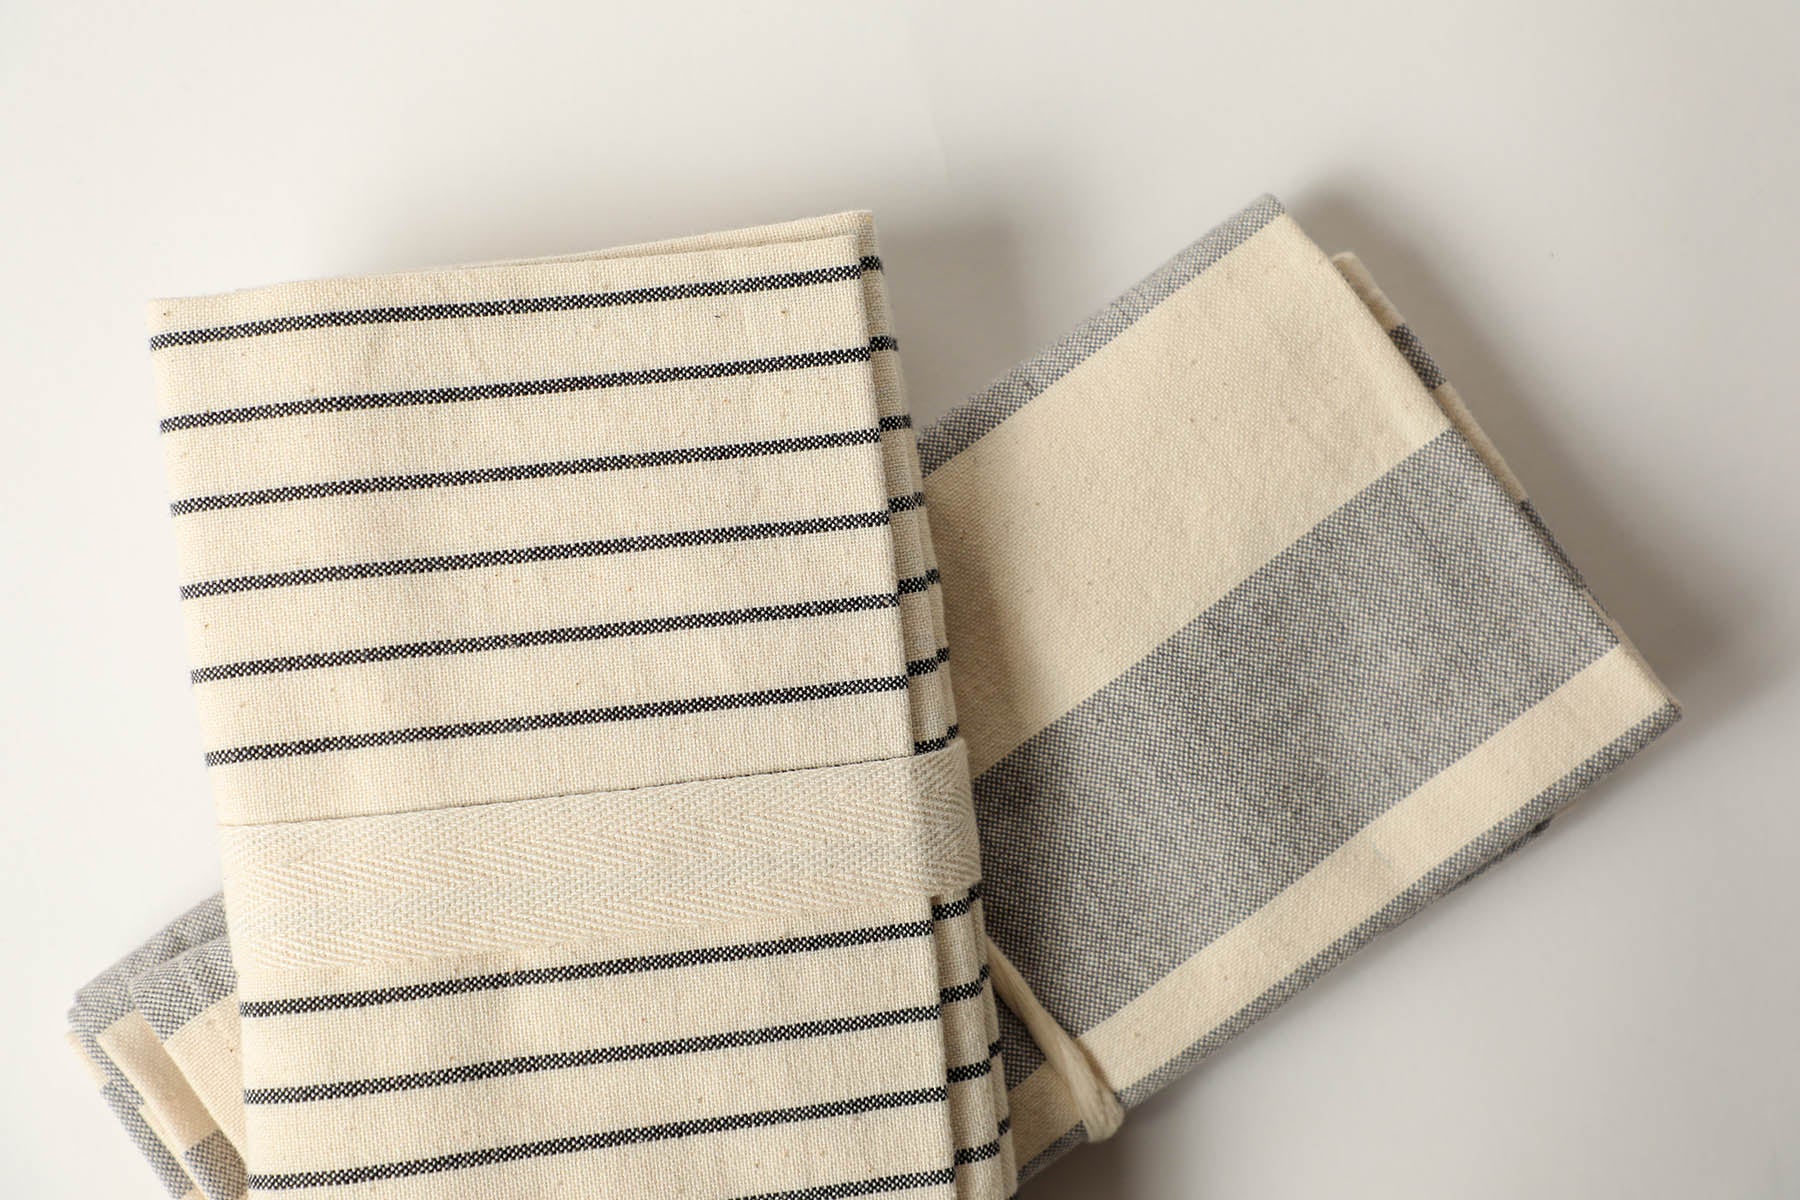 Kitchen Towels - Grey Broad Stripe, Set of 2, Gives to World Central Kitchen